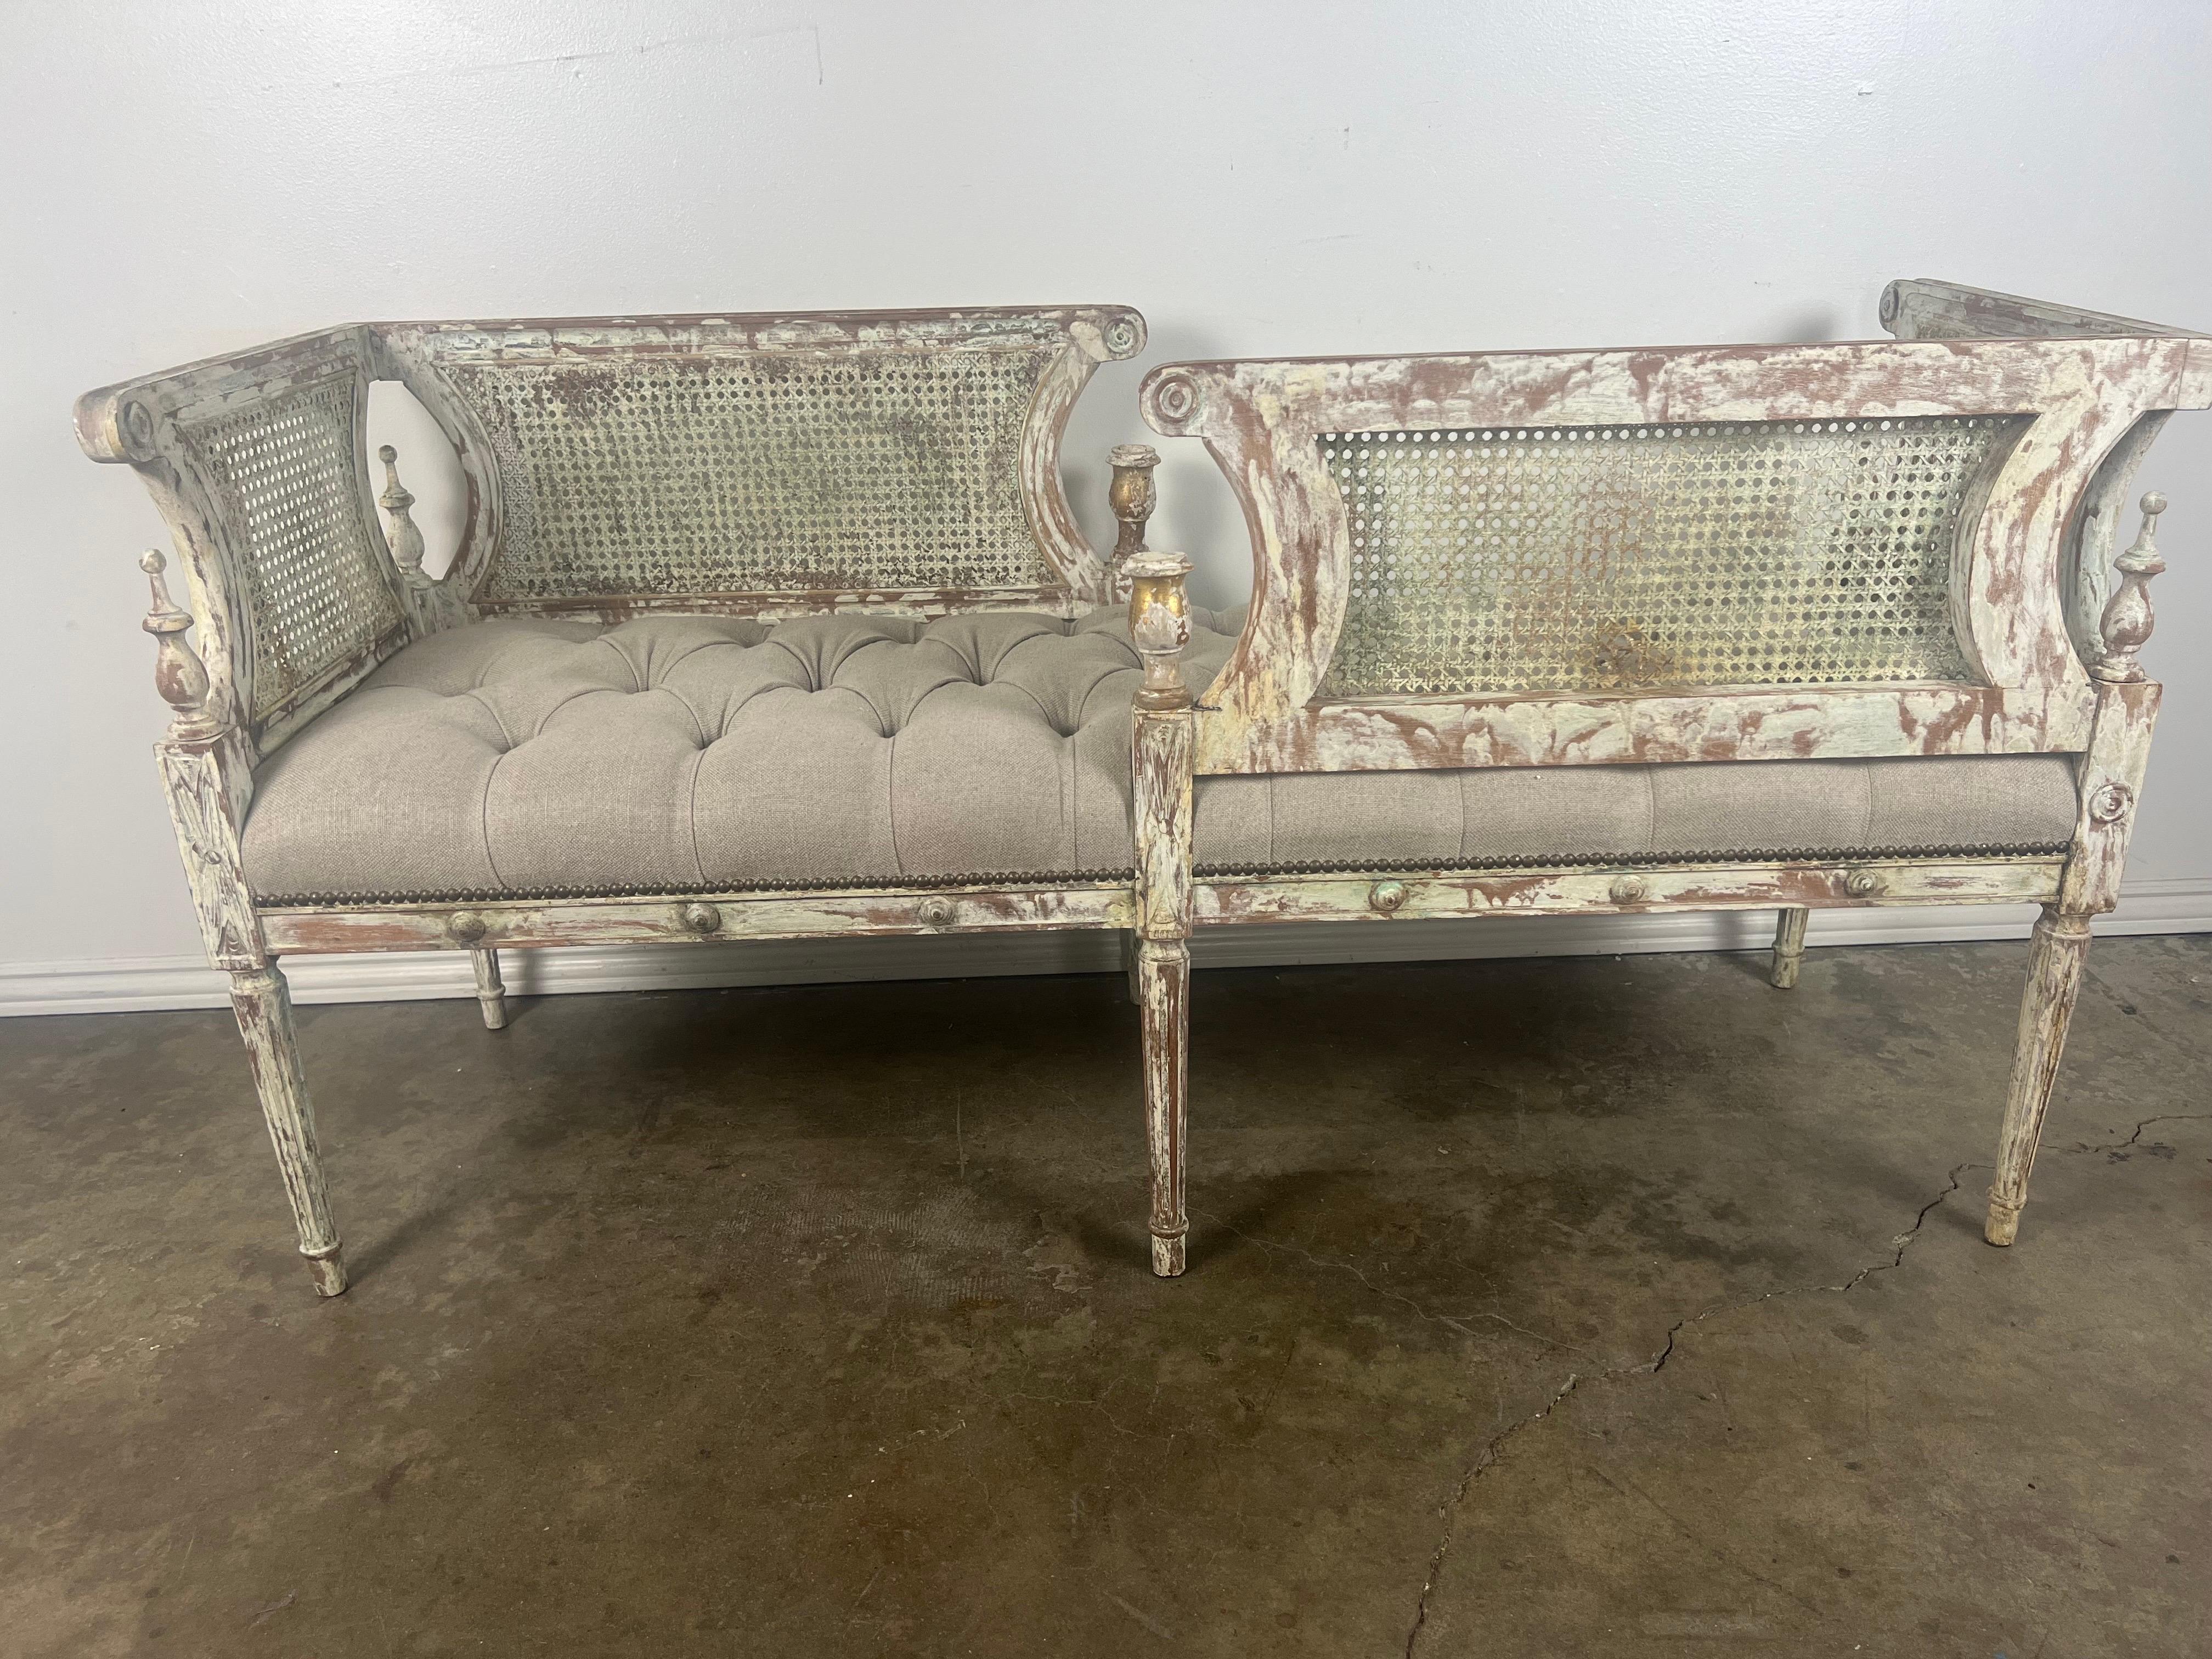 19th century Louis XVI style painted bench.  The bench has two seats that face in opposing direction.  This unique bench stands on six straight fluted legs.  The back and sides have the original cane.  The piece has a worn painted finish.  We